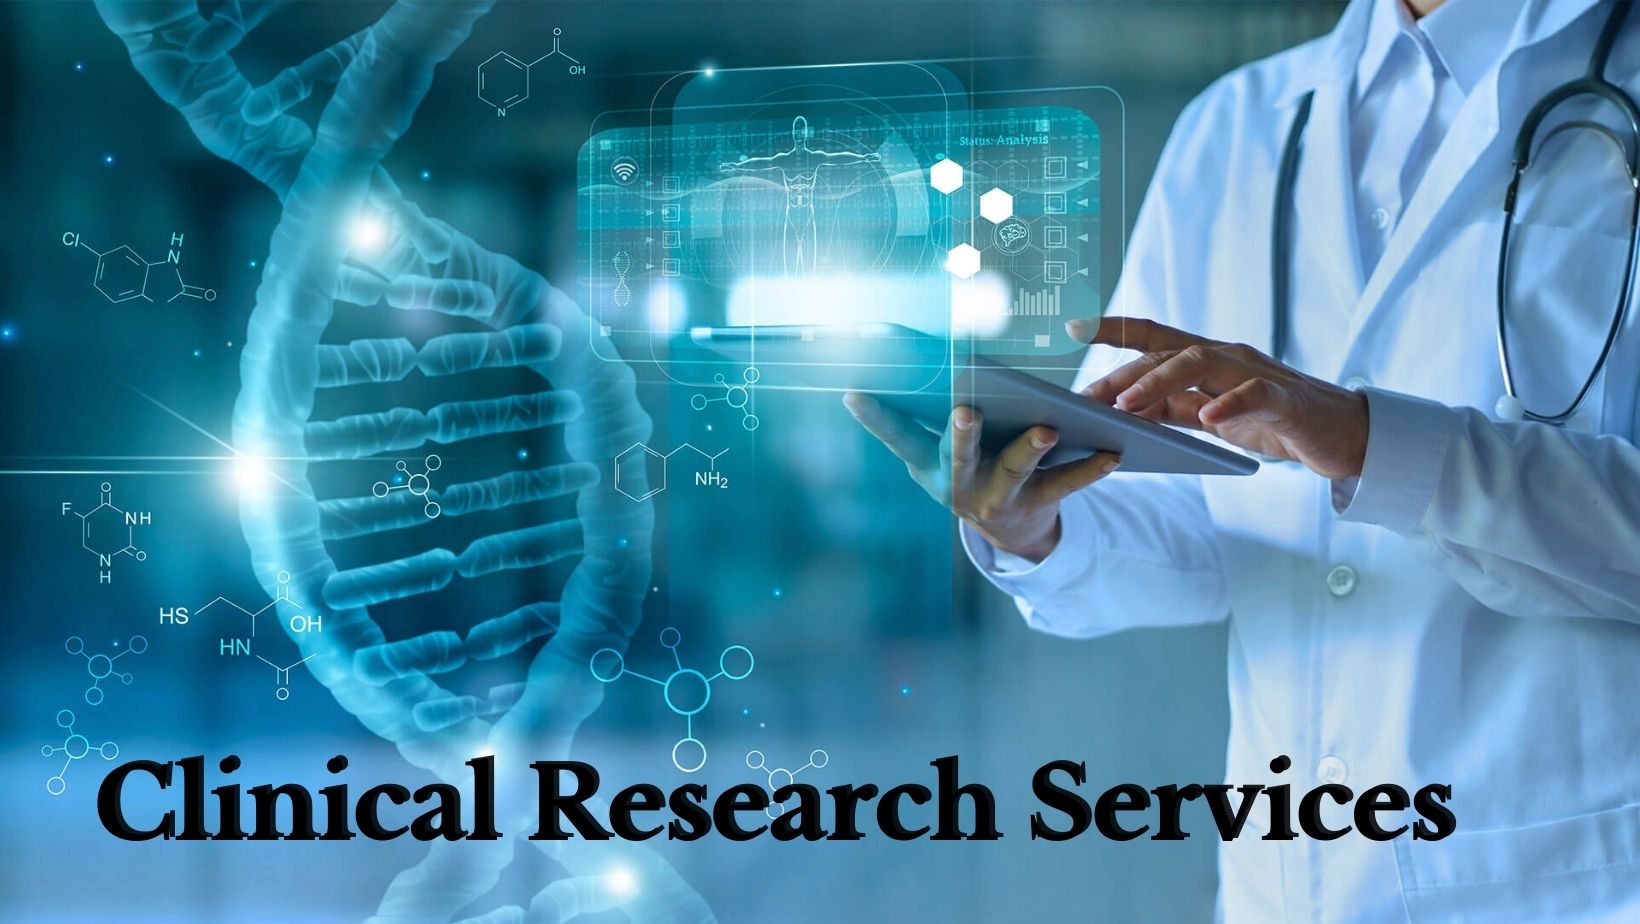 clinical research services market